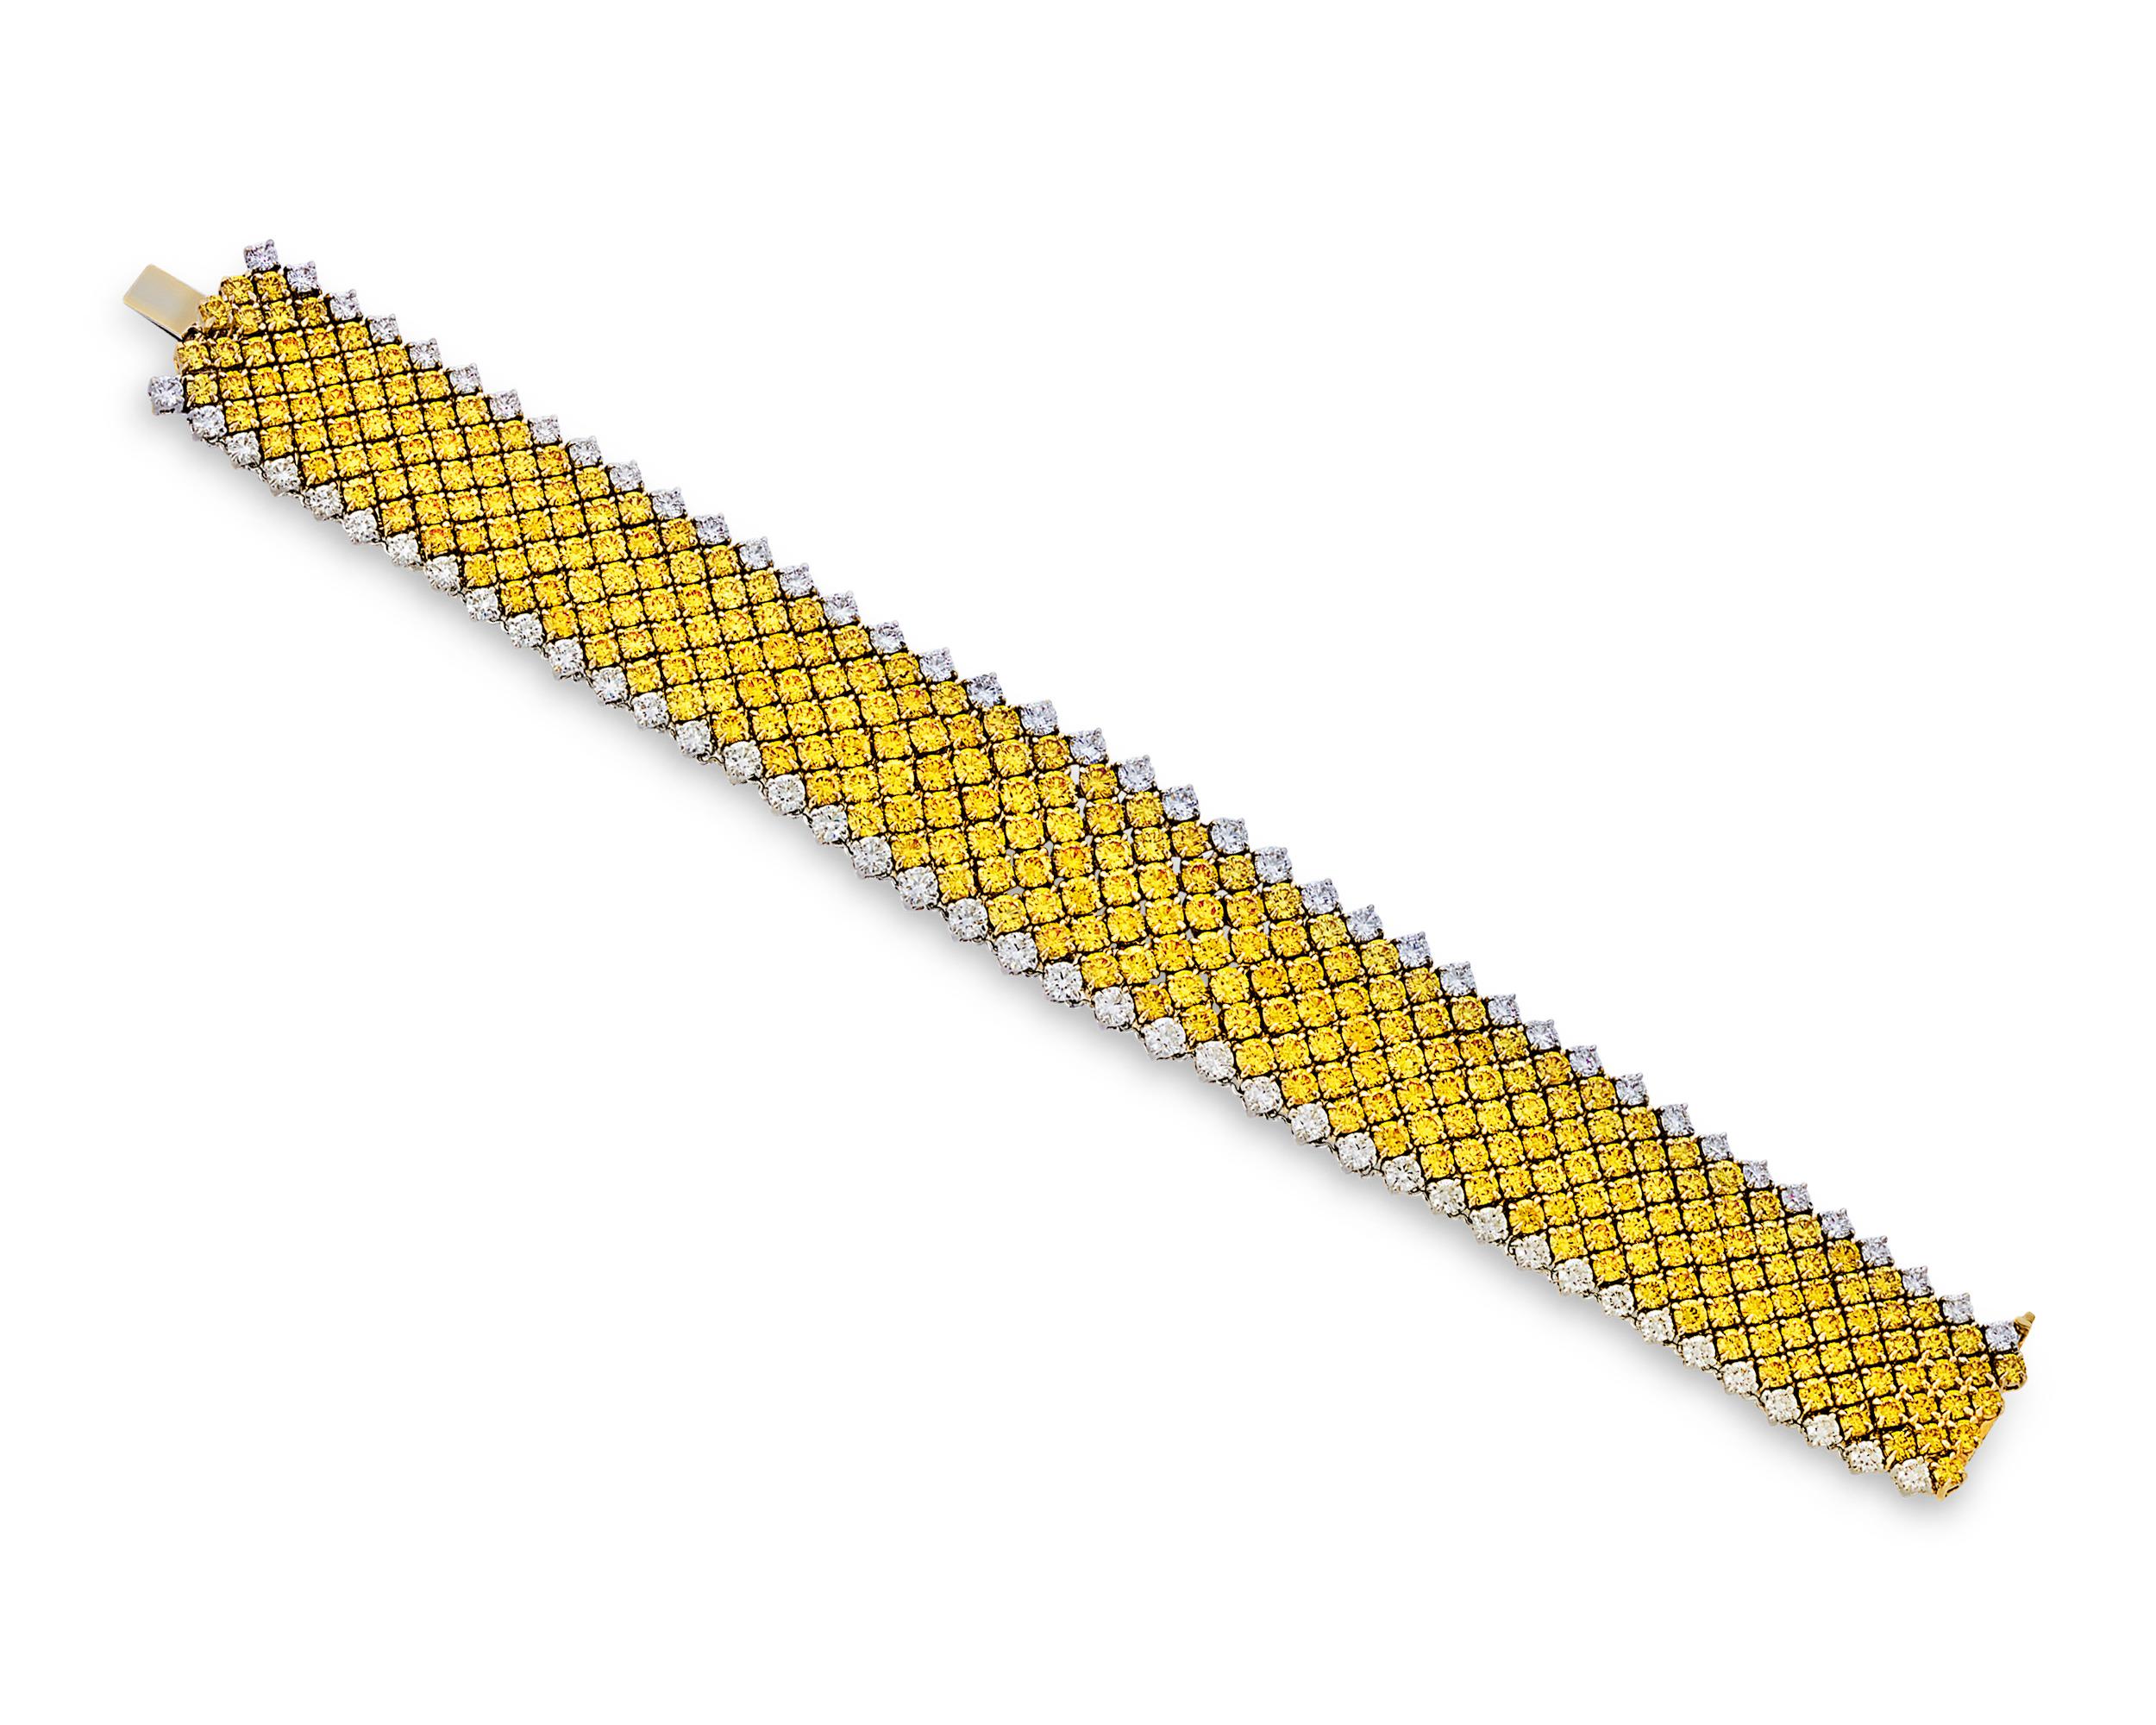 This exquisite bracelet includes an array of beautifully matched fancy vivid yellow diamonds totaling 28.40 carats. The sunny yellow diamonds are bordered by 7.43 carats of white diamonds. These brilliant jewels are meticulously fit together within